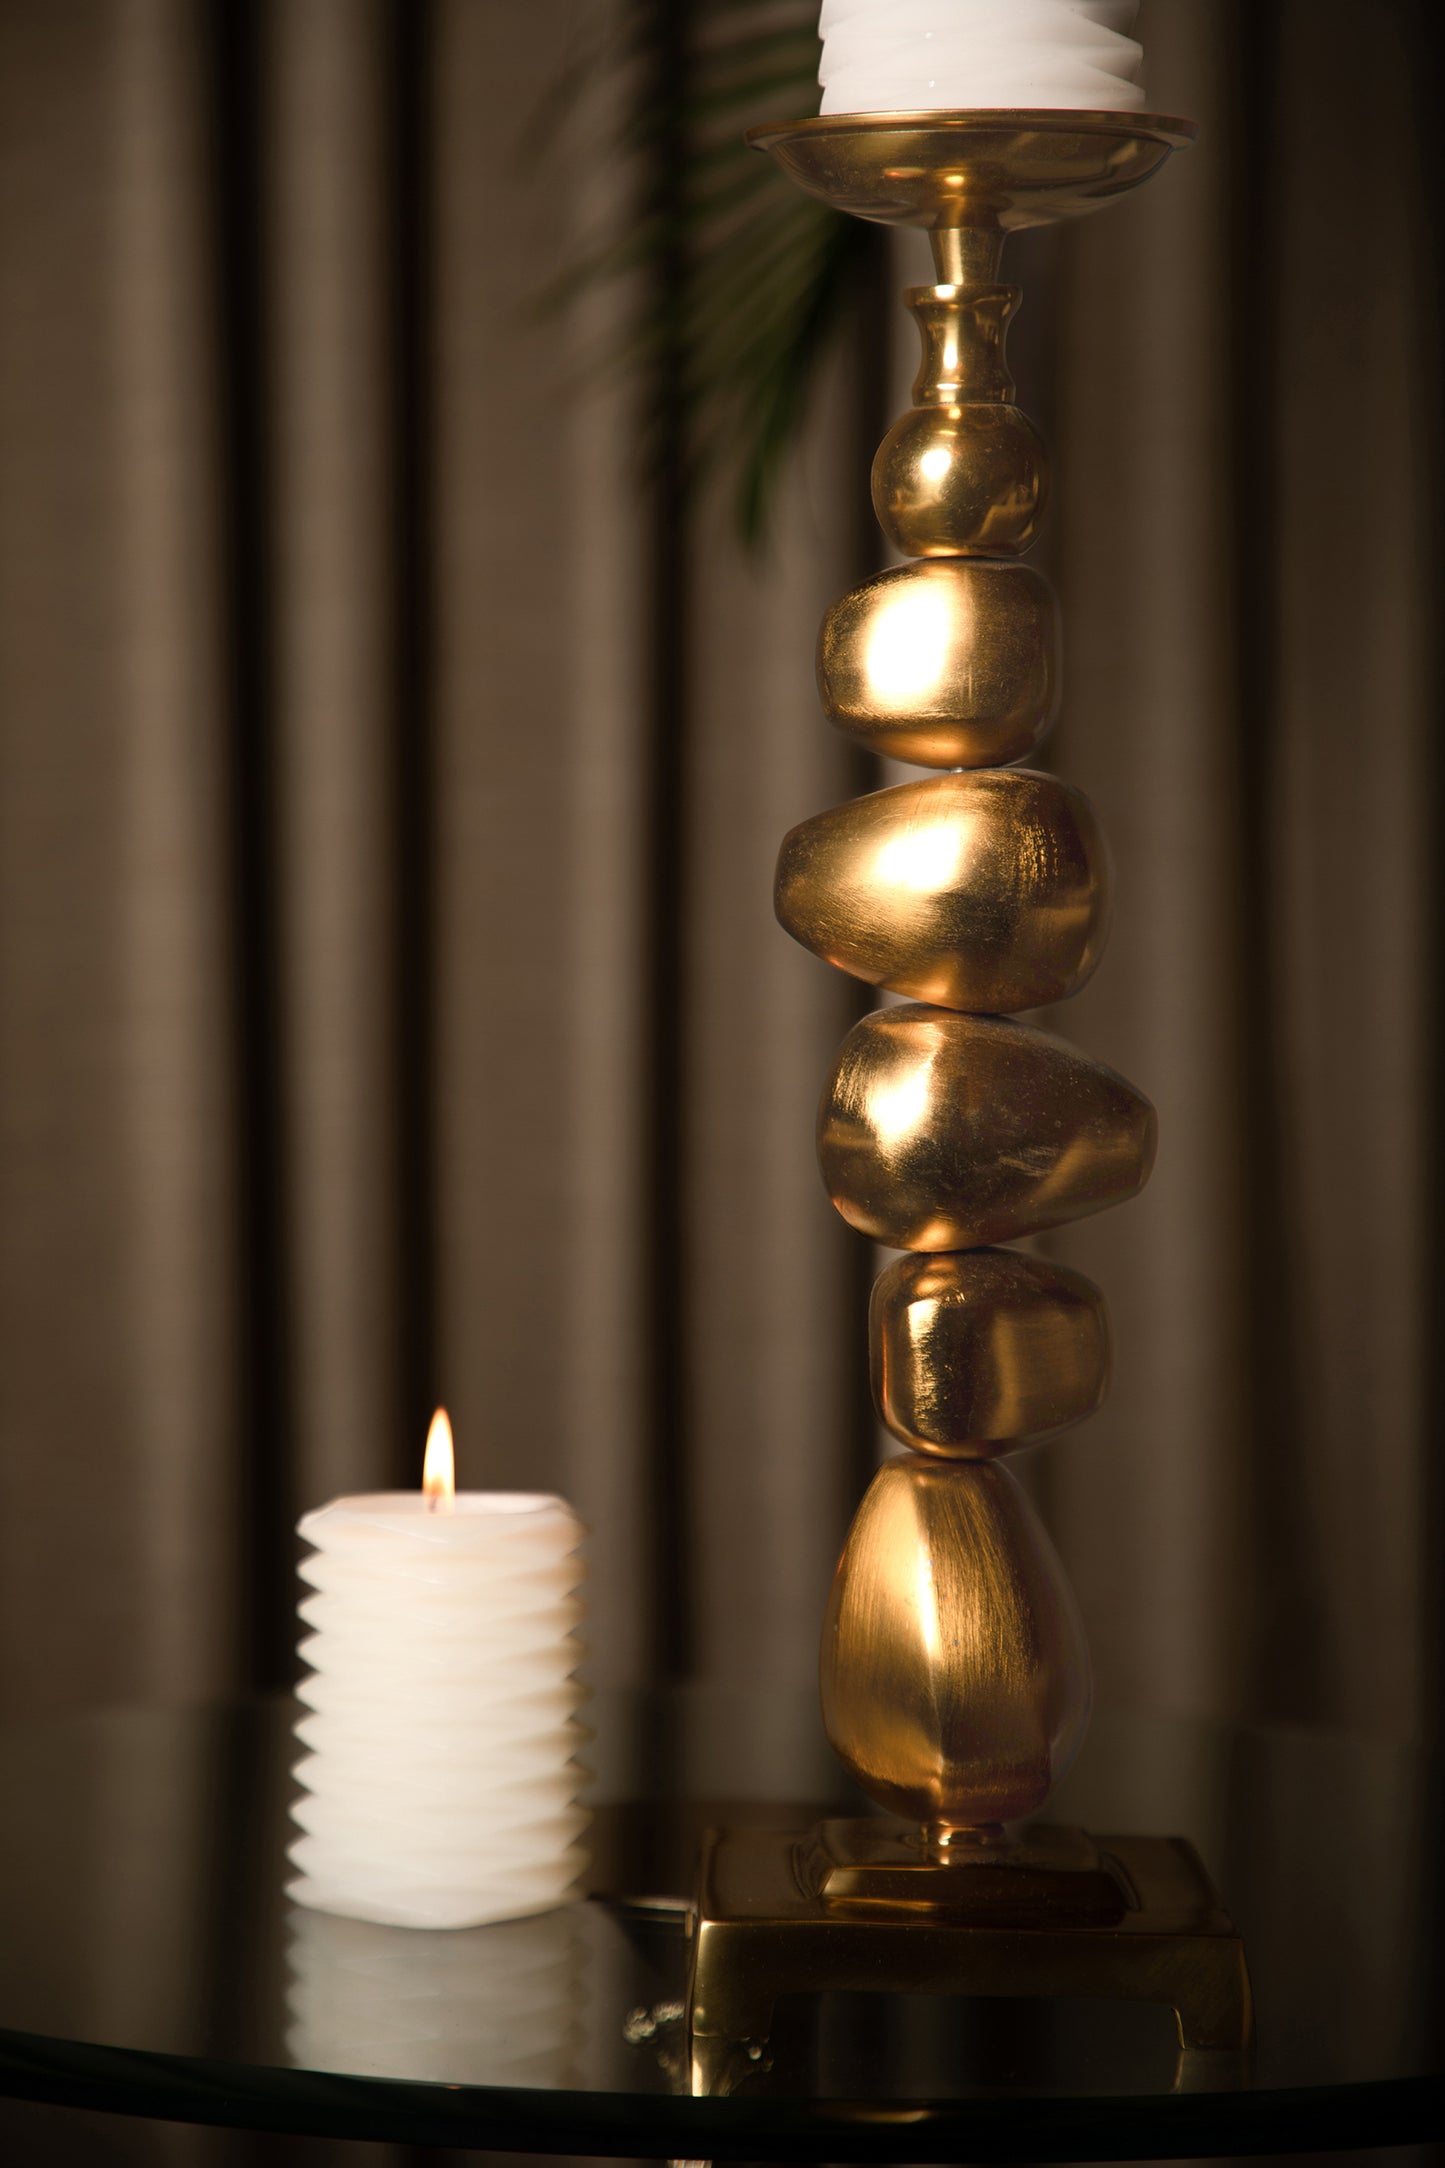 These candle stands draw inspiration from the smooth, tranquil shapes of pebbles found in nature.